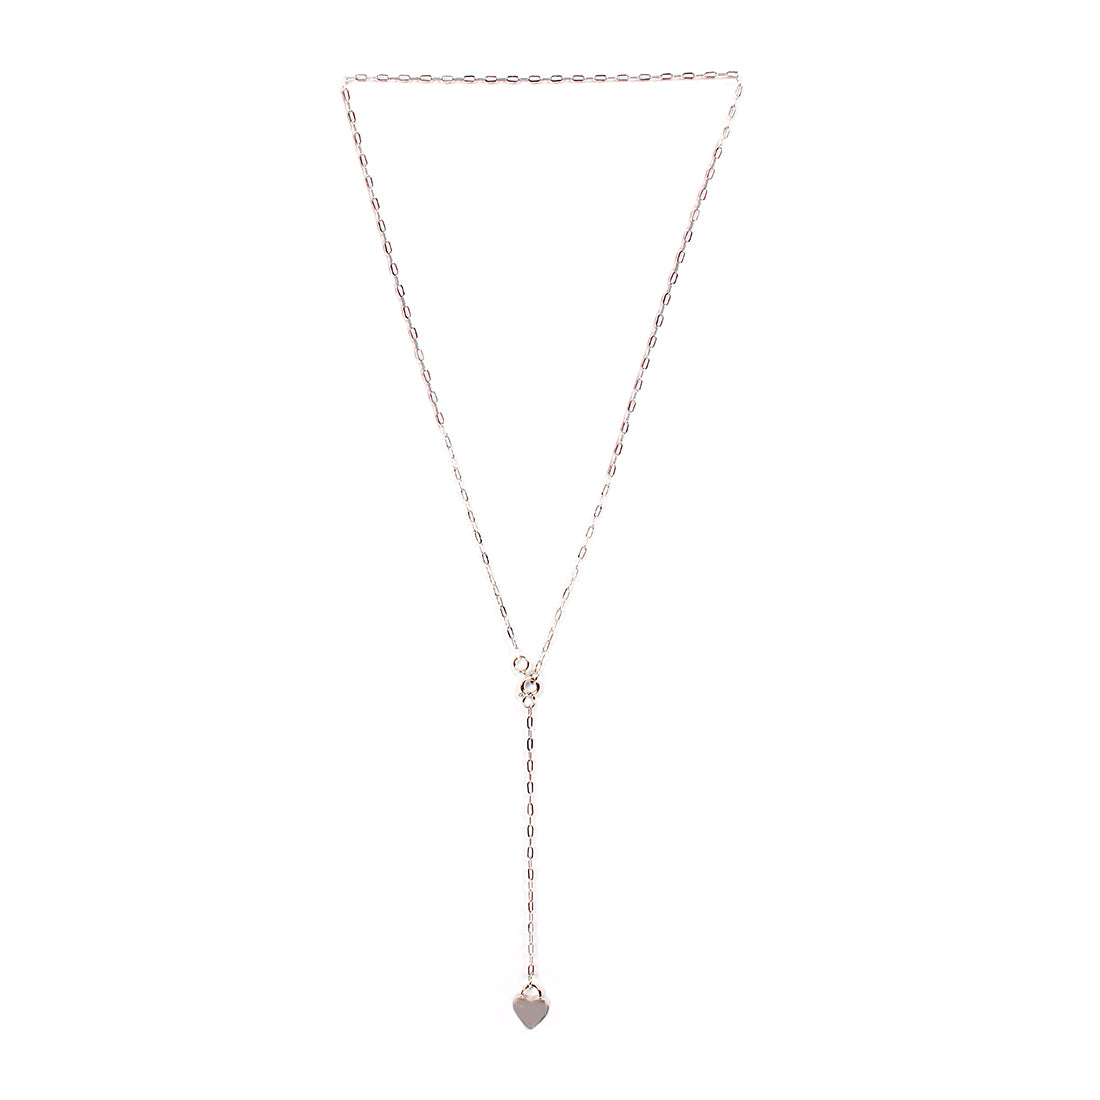 DAINTY SILVER-TONED HEART DROP PENDANT CHAIN-LINK NECKLACE